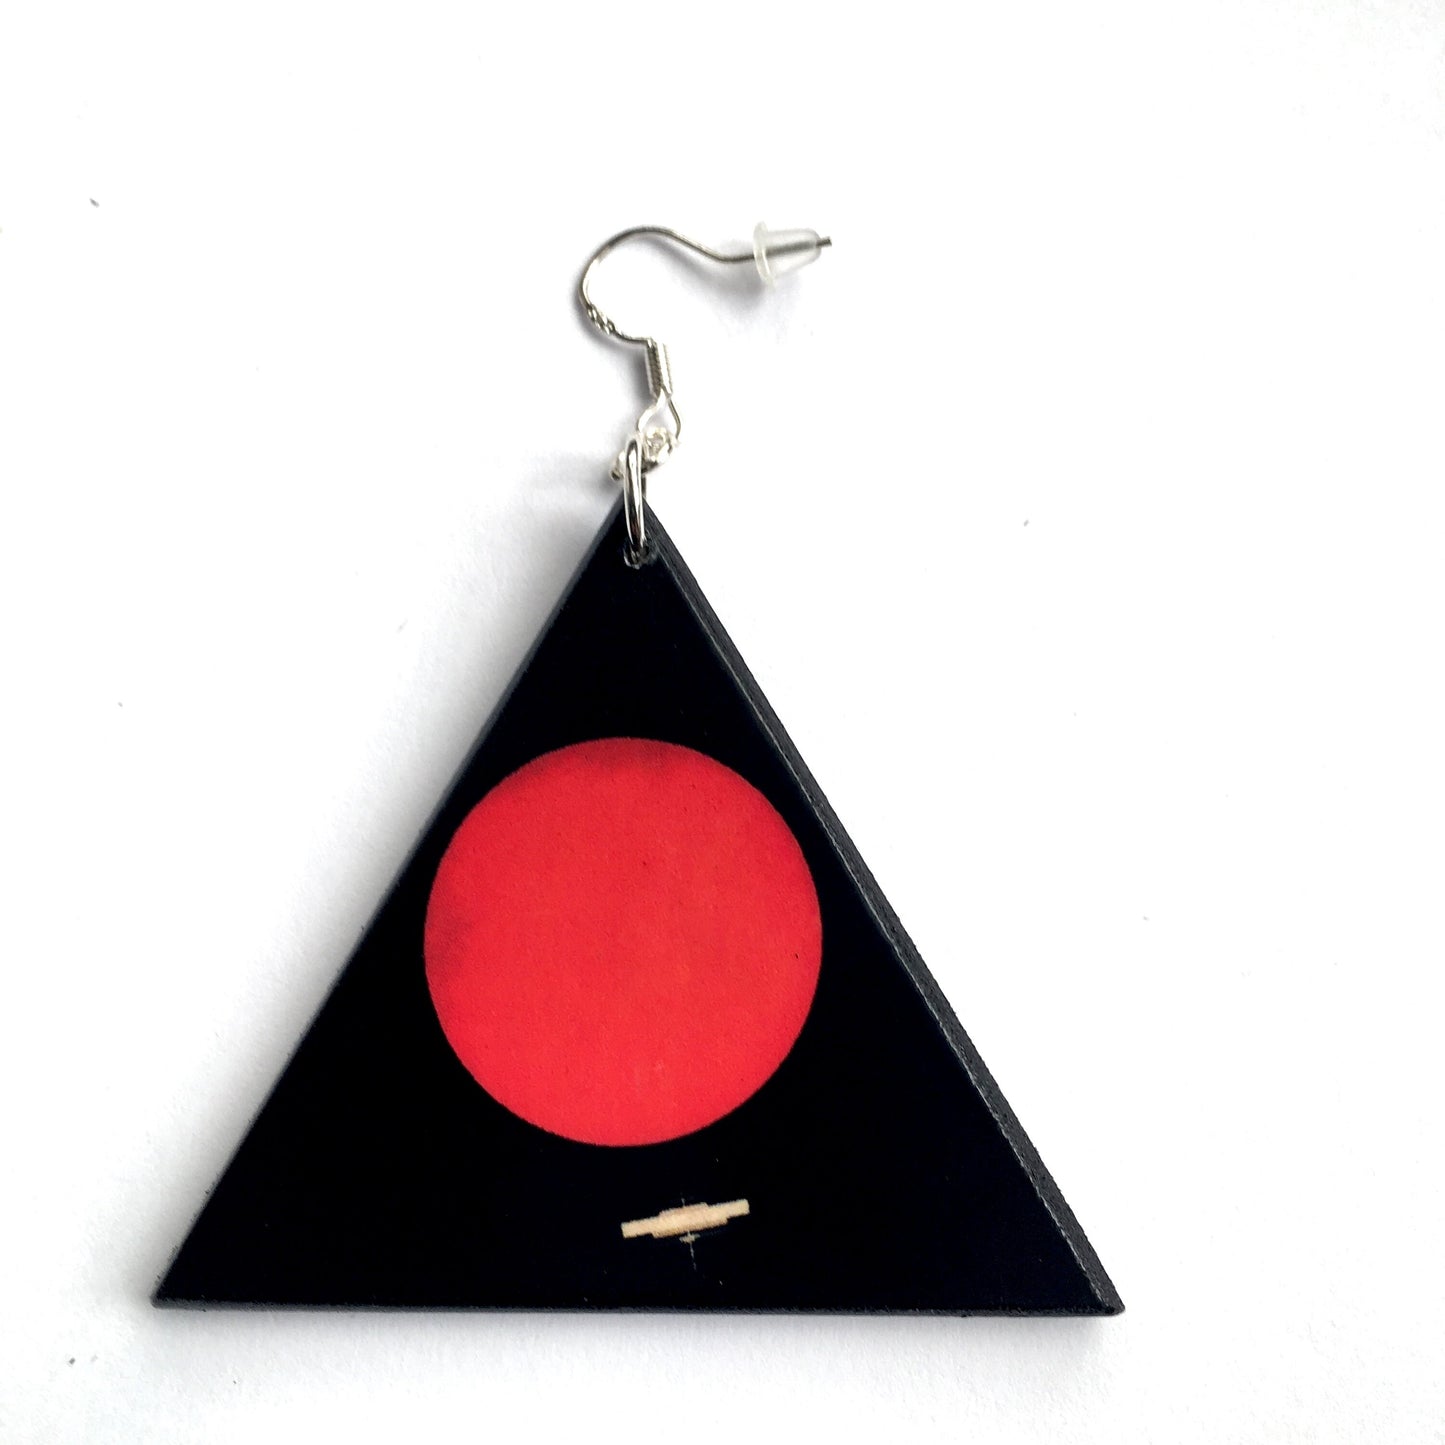 Triangular earring on sustainable wood and sterling silver hook. Color red circle on the black base. Obljewellery collection